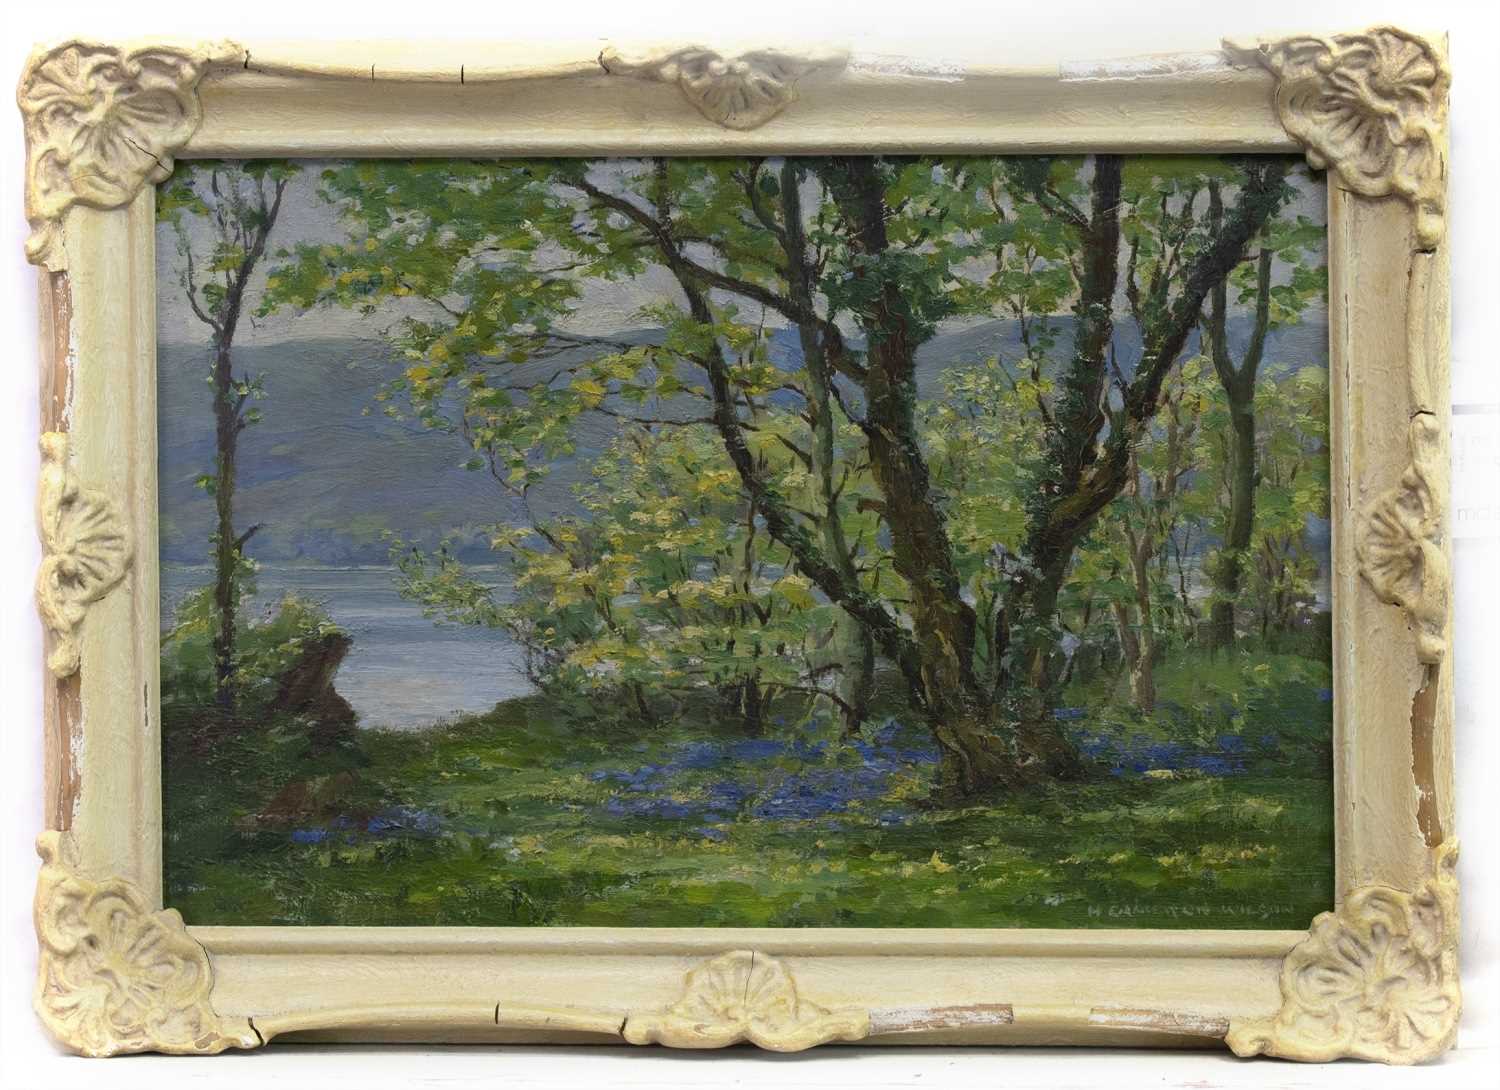 Lot 58 - BLUEBELLS BY THE LOCH, AN OIL BY HUGH CAMERON WILSON